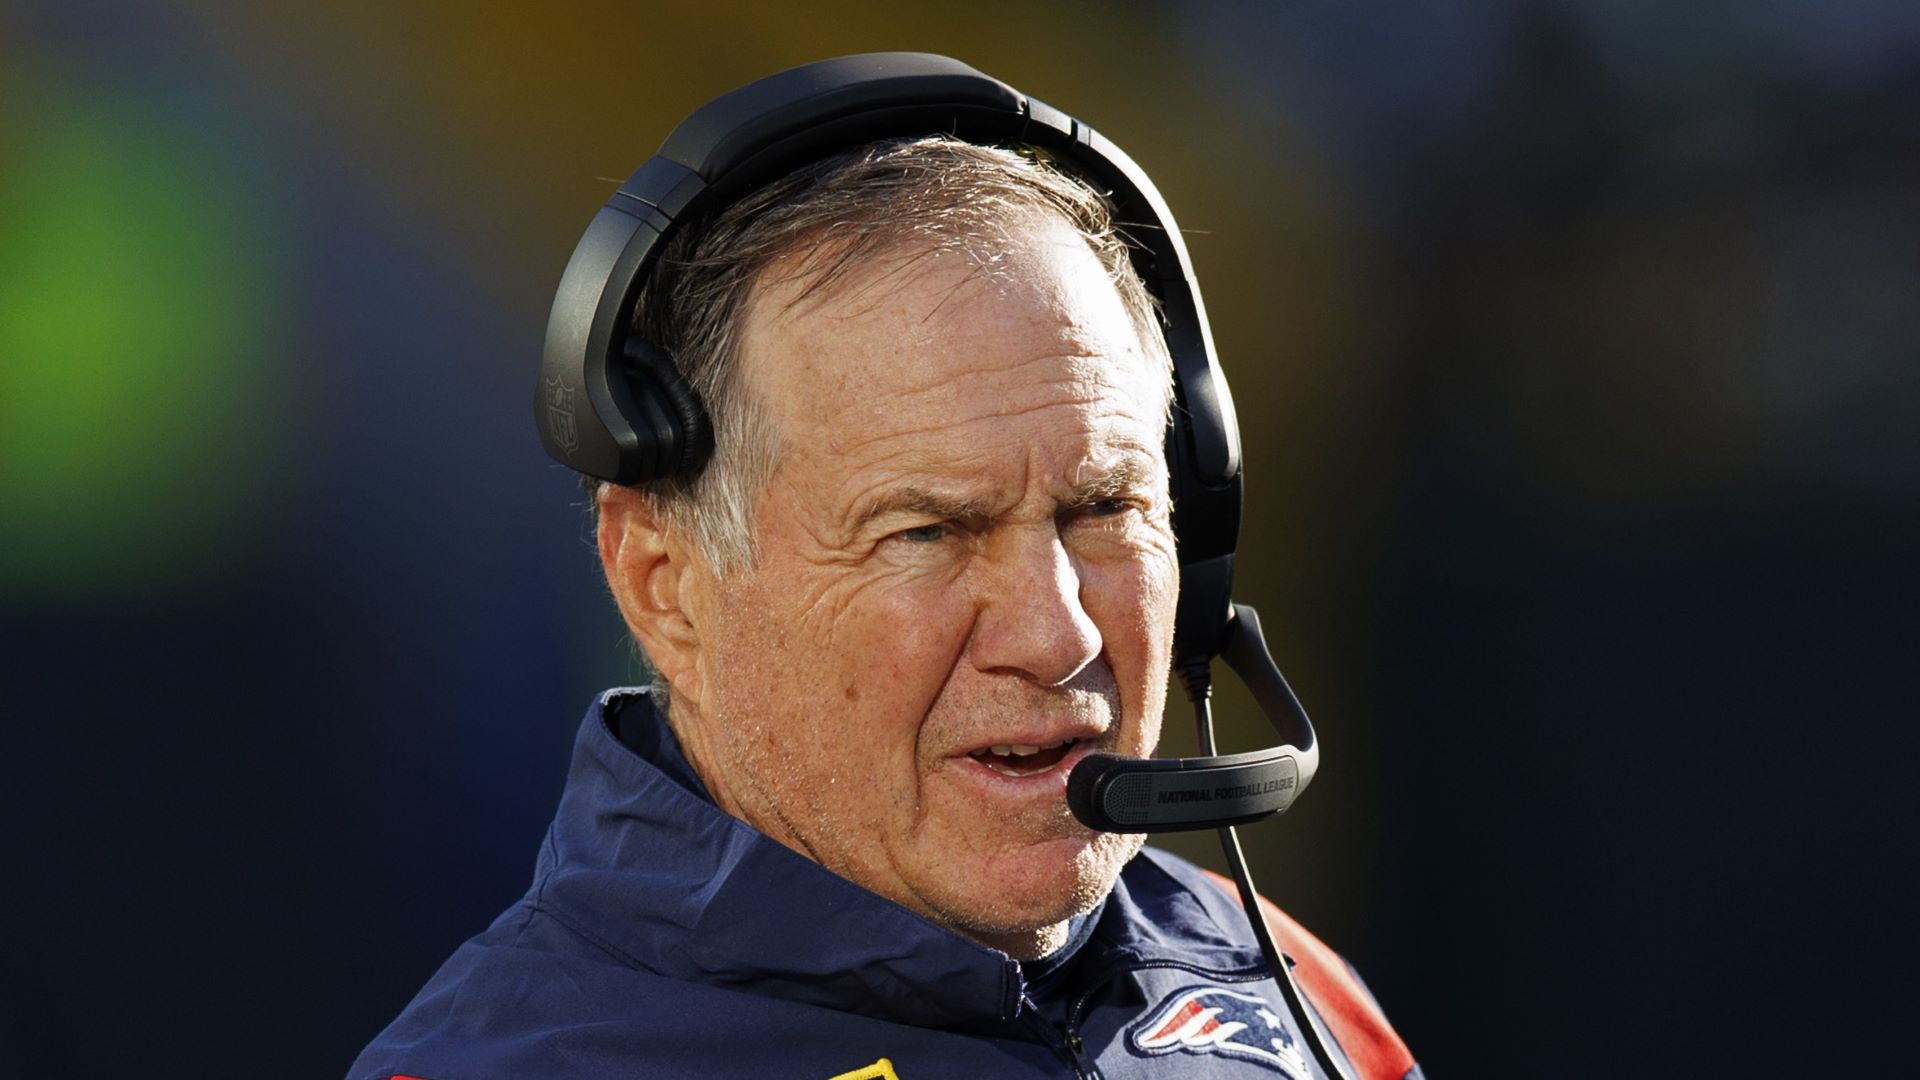 How Bill Belichick’s Tiger Woods Story Totally Backfired With
Patriots